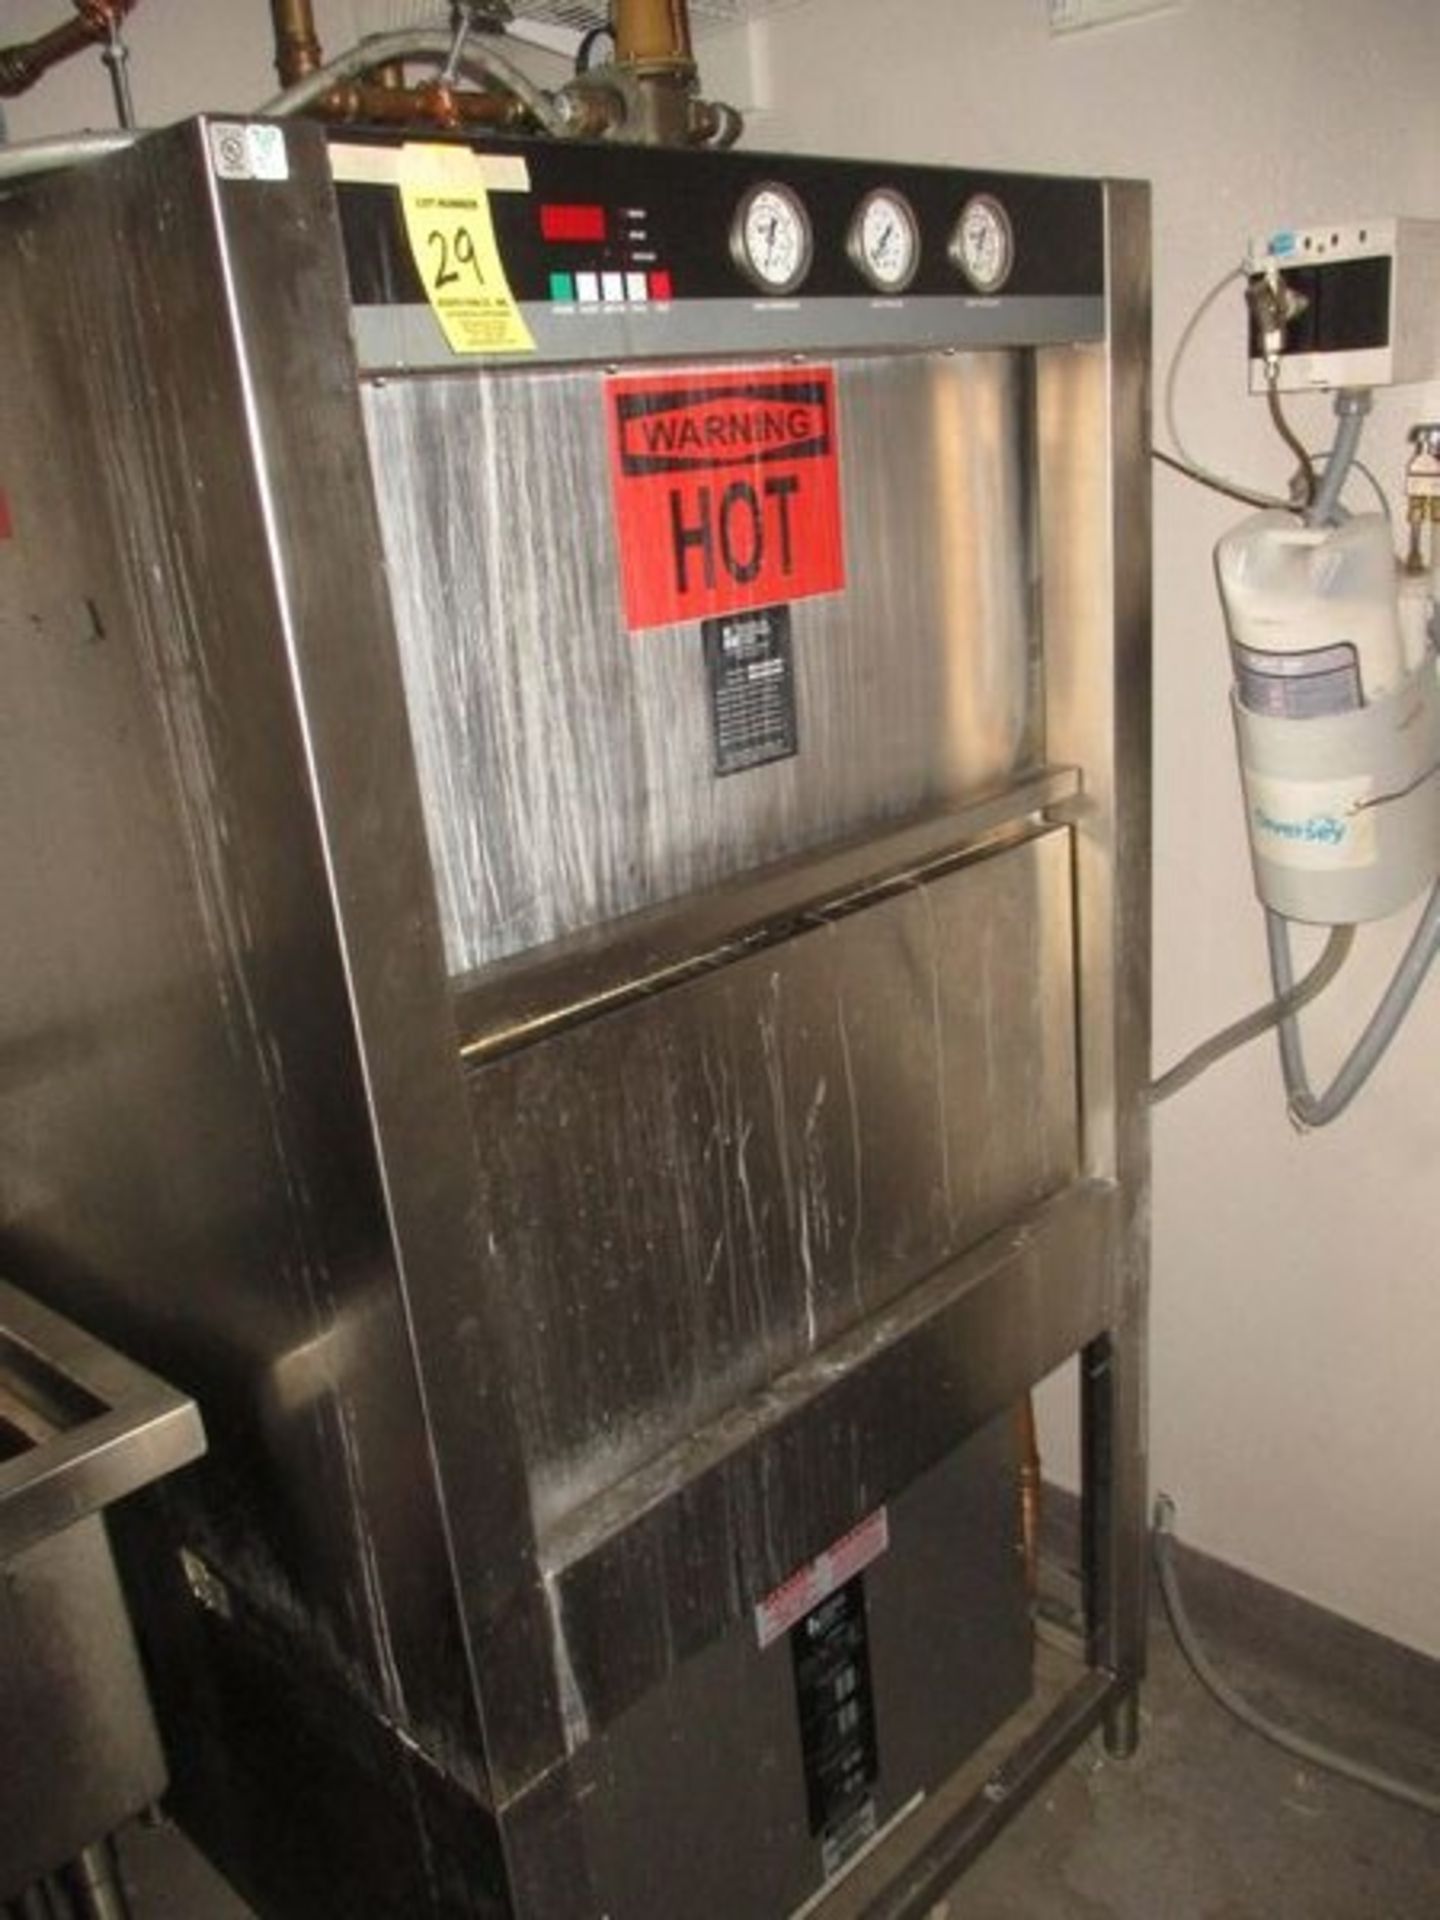 Douglas SD-10 Dishwasher, Gas (Asset Located in Brighton, MA) - Image 2 of 3